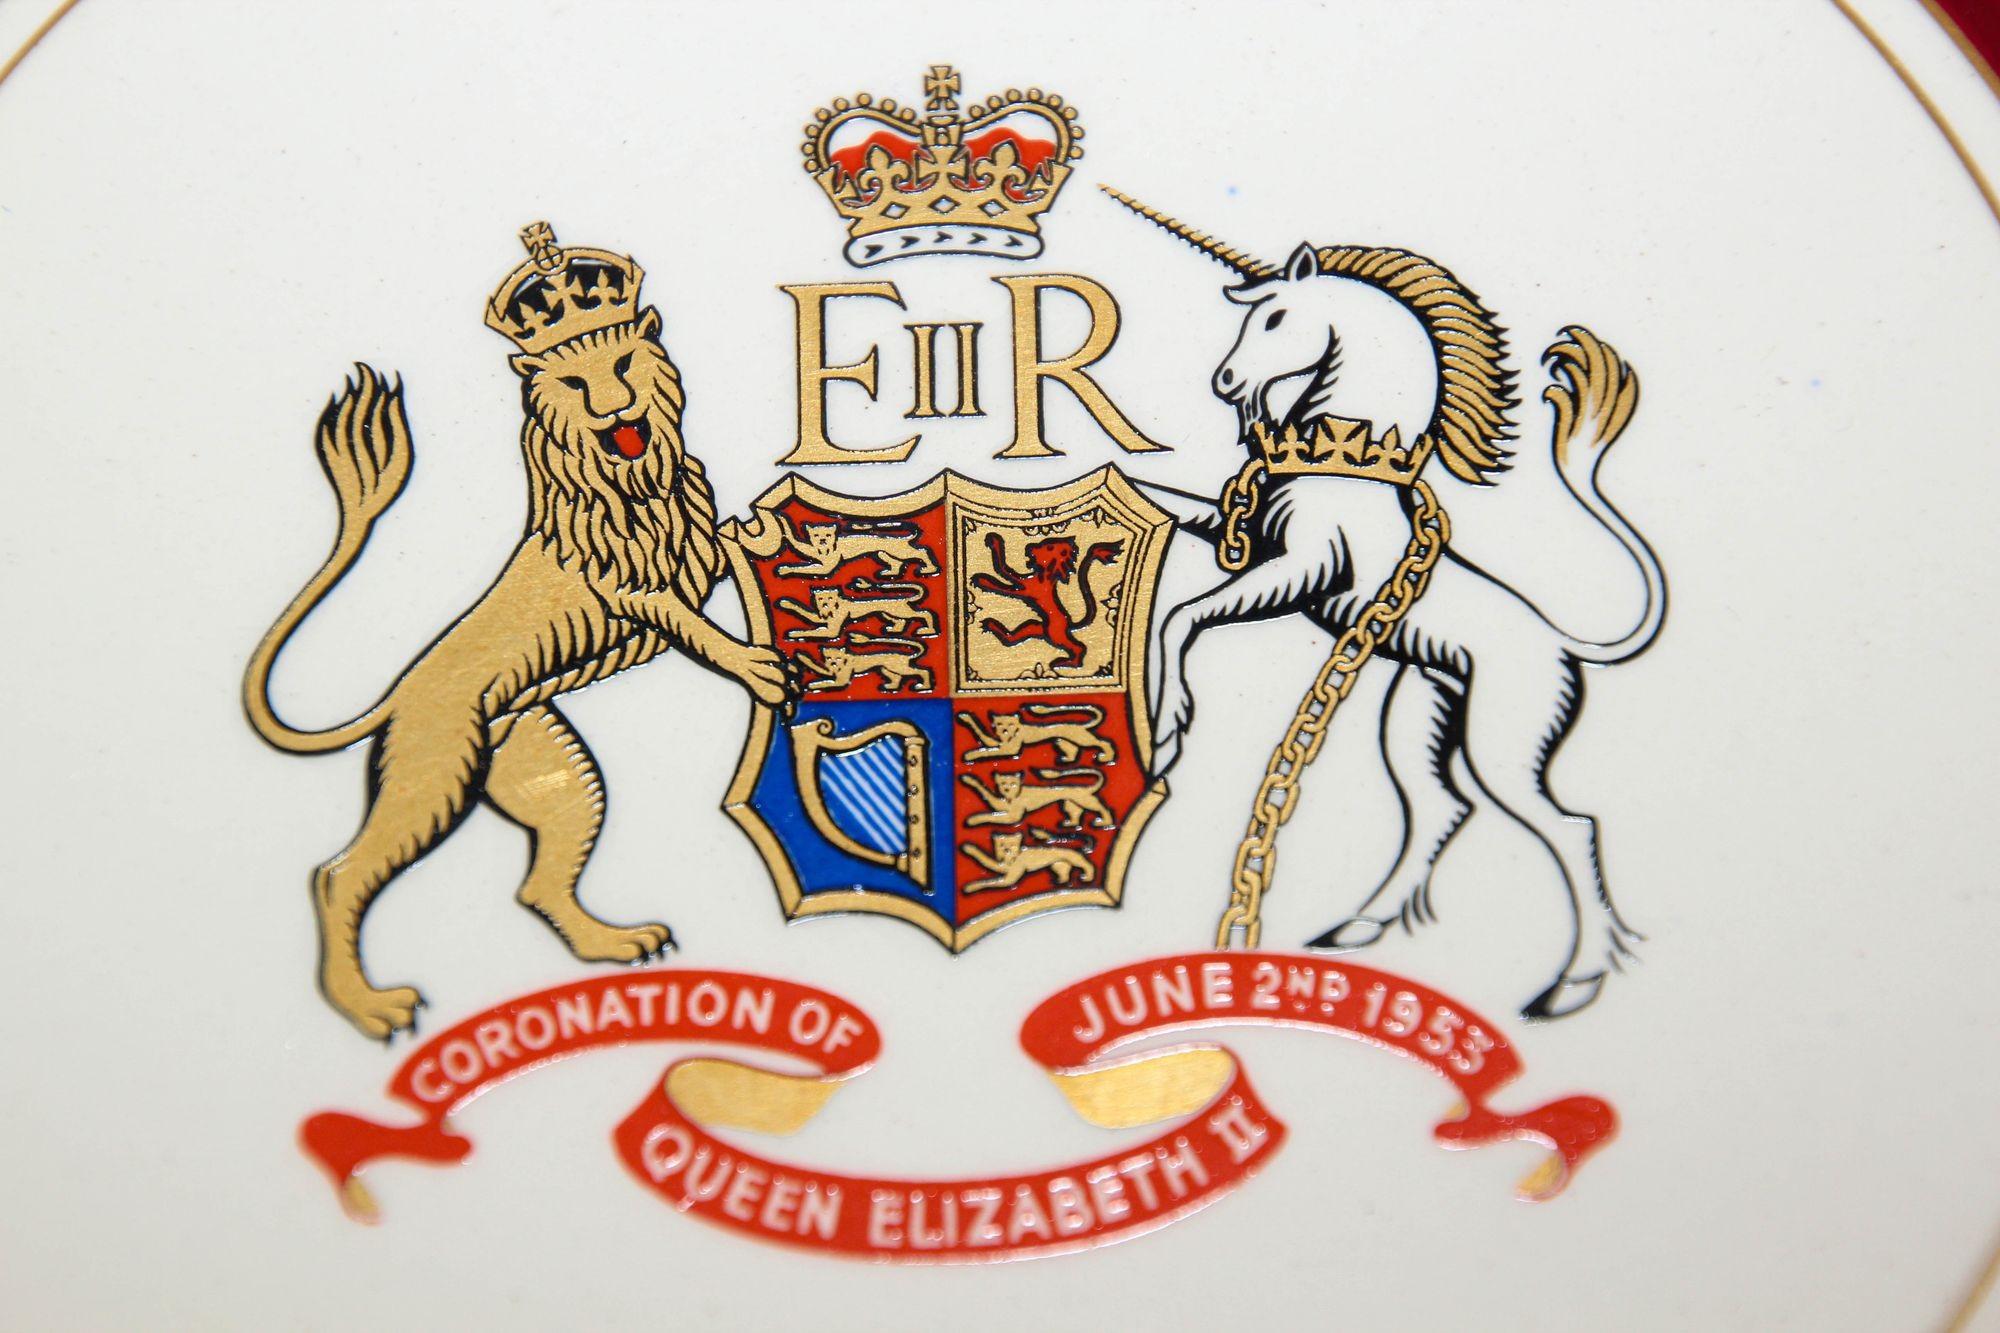 Coronation Plate Queen Elizabeth II June 2nd 1953 Burleigh Ware Burslem England In Good Condition For Sale In North Hollywood, CA